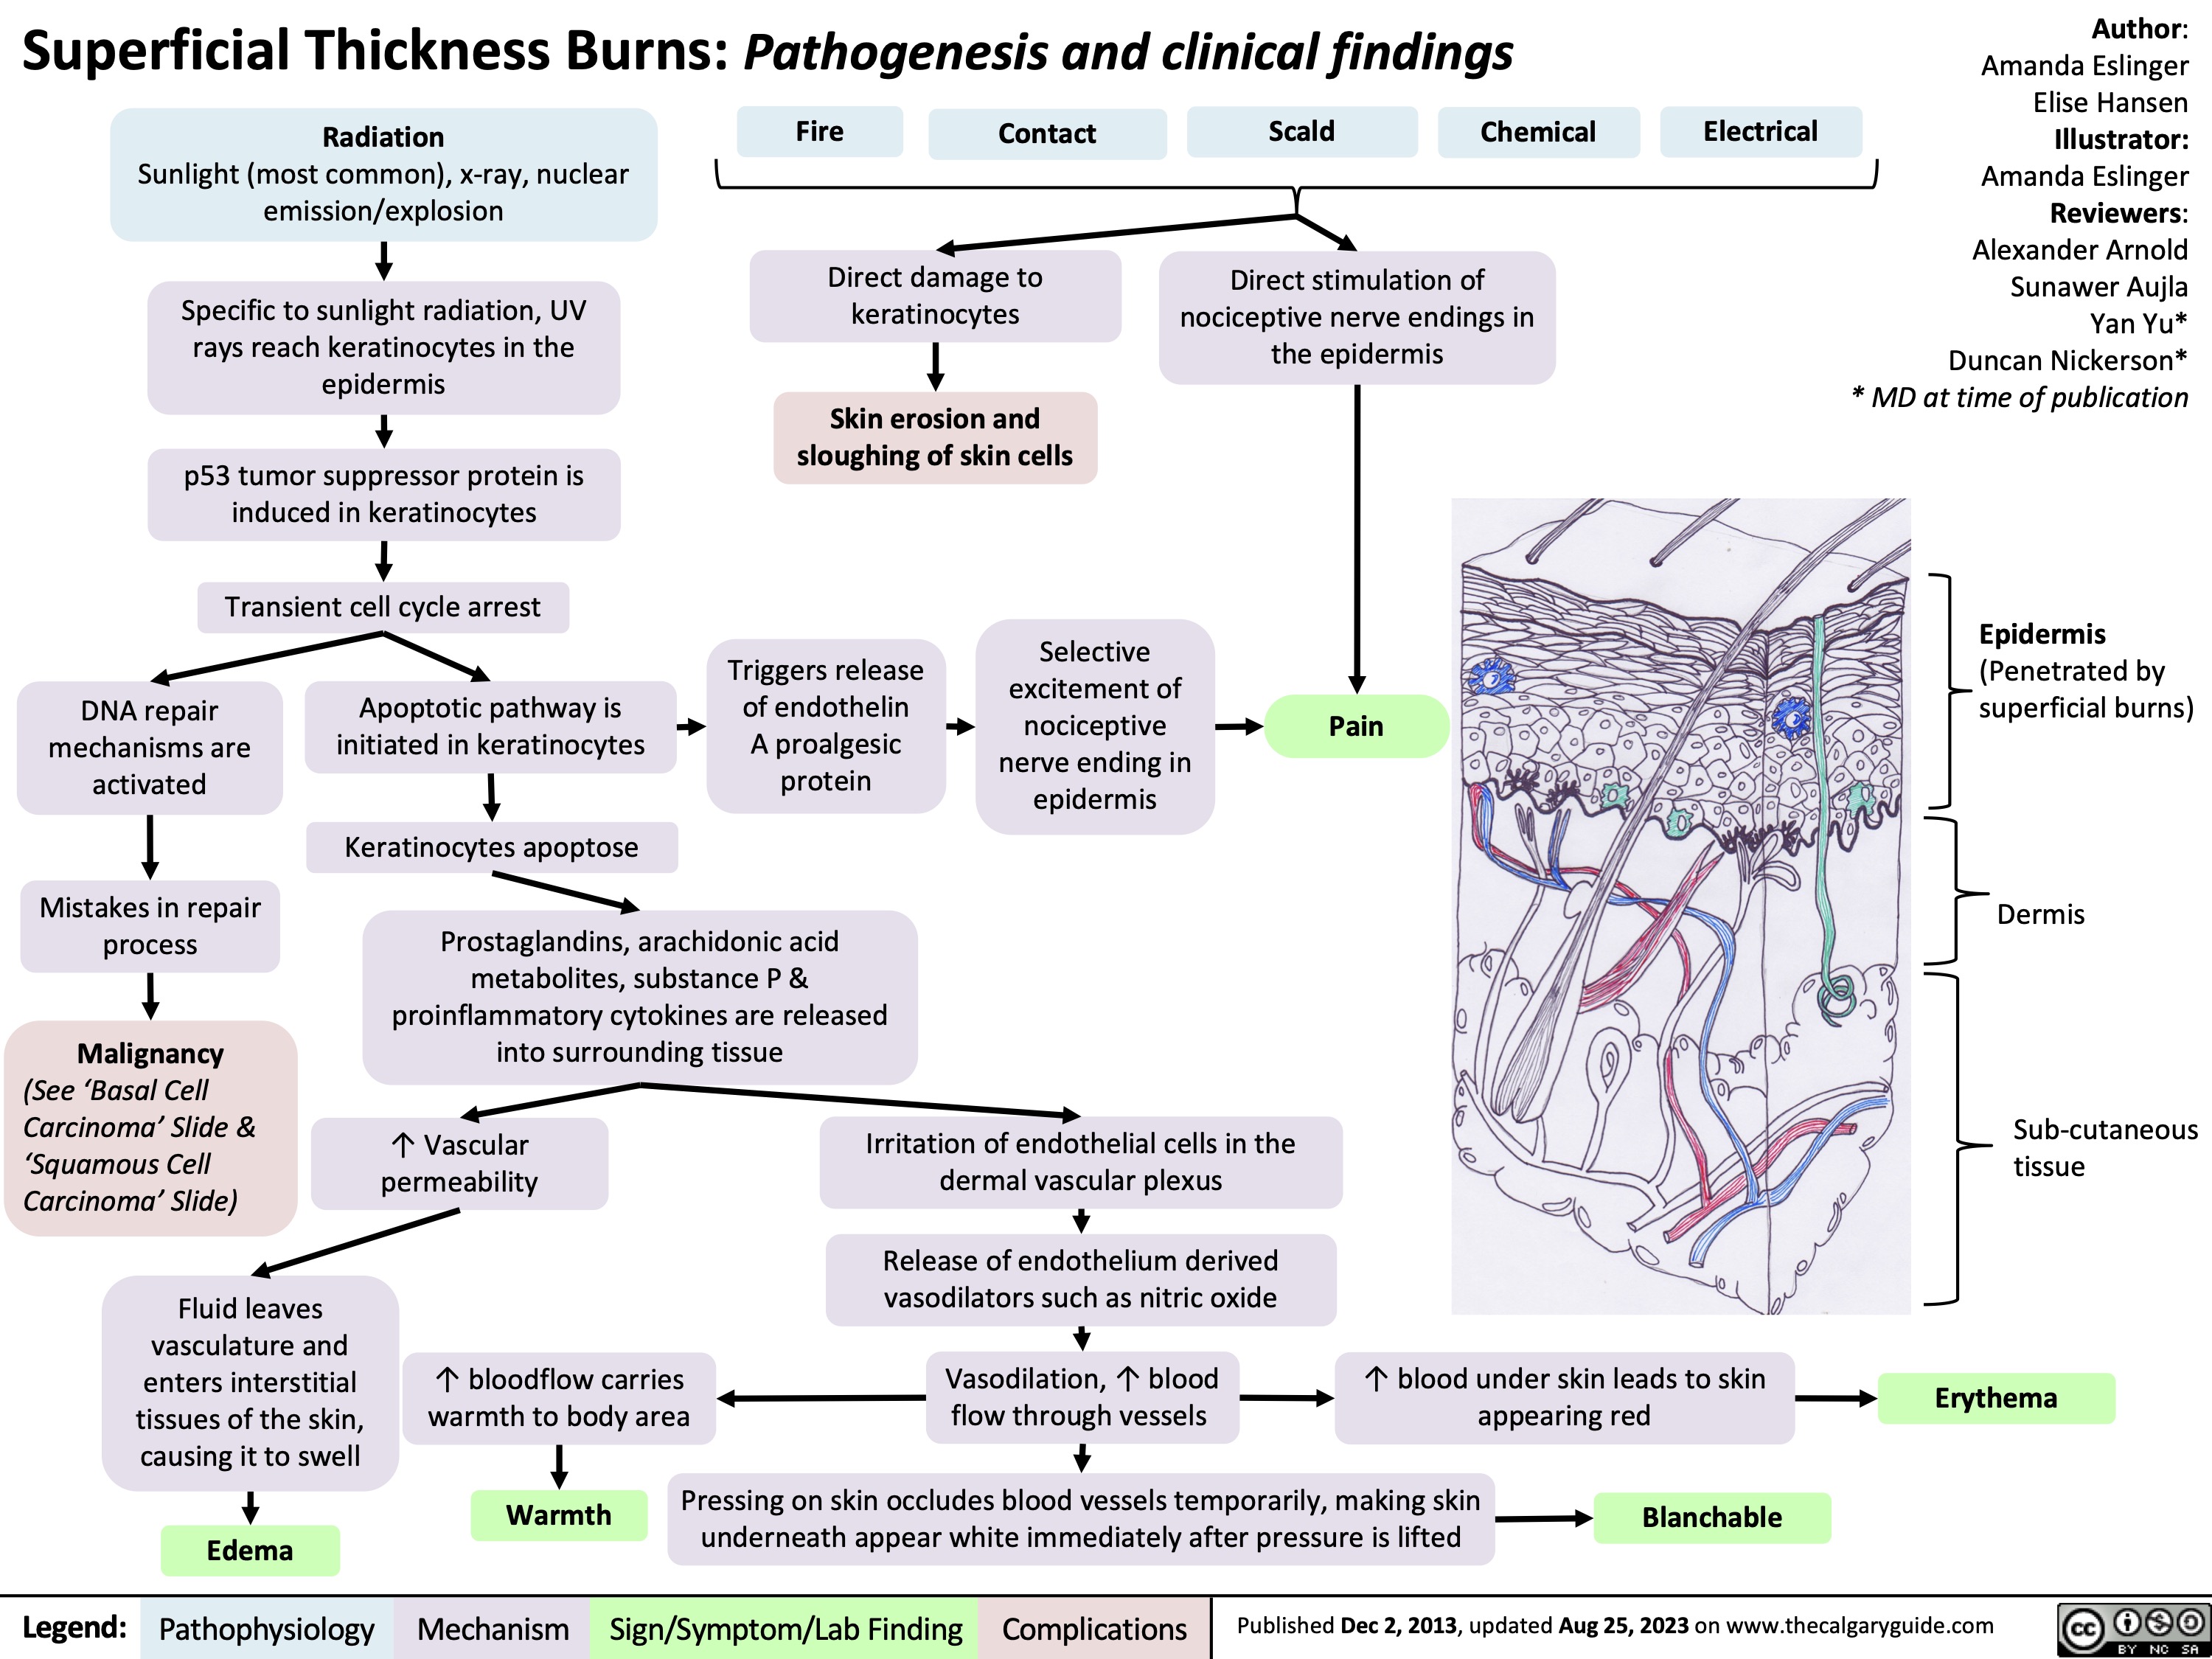 Superficial Thickness Burns: Pathogenesis and clinical findings
Author: Amanda Eslinger Elise Hansen Illustrator: Amanda Eslinger Reviewers: Alexander Arnold Sunawer Aujla Yan Yu* Duncan Nickerson* * MD at time of publication
Epidermis
(Penetrated by superficial burns)
Dermis
Sub-cutaneous tissue
Erythema
      Radiation
Sunlight (most common), x-ray, nuclear emission/explosion
Specific to sunlight radiation, UV rays reach keratinocytes in the epidermis
p53 tumor suppressor protein is induced in keratinocytes
Transient cell cycle arrest Apoptotic pathway is
Fire
Contact
Scald
Chemical
Electrical
    Direct damage to keratinocytes
Skin erosion and sloughing of skin cells
Direct stimulation of nociceptive nerve endings in the epidermis
            DNA repair mechanisms are activated
Mistakes in repair process
Malignancy
(See ‘Basal Cell Carcinoma’ Slide & ‘Squamous Cell Carcinoma’ Slide)
Fluid leaves vasculature and enters interstitial tissues of the skin, causing it to swell
Edema
Triggers release of endothelin A proalgesic protein
Selective excitement of nociceptive nerve ending in epidermis
Pain
 initiated in keratinocytes
Keratinocytes apoptose
     Prostaglandins, arachidonic acid metabolites, substance P & proinflammatory cytokines are released into surrounding tissue
      ↑ Vascular permeability
↑ bloodflow carries warmth to body area
Irritation of endothelial cells in the dermal vascular plexus
Release of endothelium derived vasodilators such as nitric oxide
Vasodilation, ↑ blood flow through vessels
↑ blood under skin leads to skin appearing red
         Warmth Pressing on skin occludes blood vessels temporarily, making skin Blanchable underneath appear white immediately after pressure is lifted
    Legend:
 Pathophysiology
 Mechanism
Sign/Symptom/Lab Finding
 Complications
 Published Dec 2, 2013, updated Aug 25, 2023 on www.thecalgaryguide.com
  